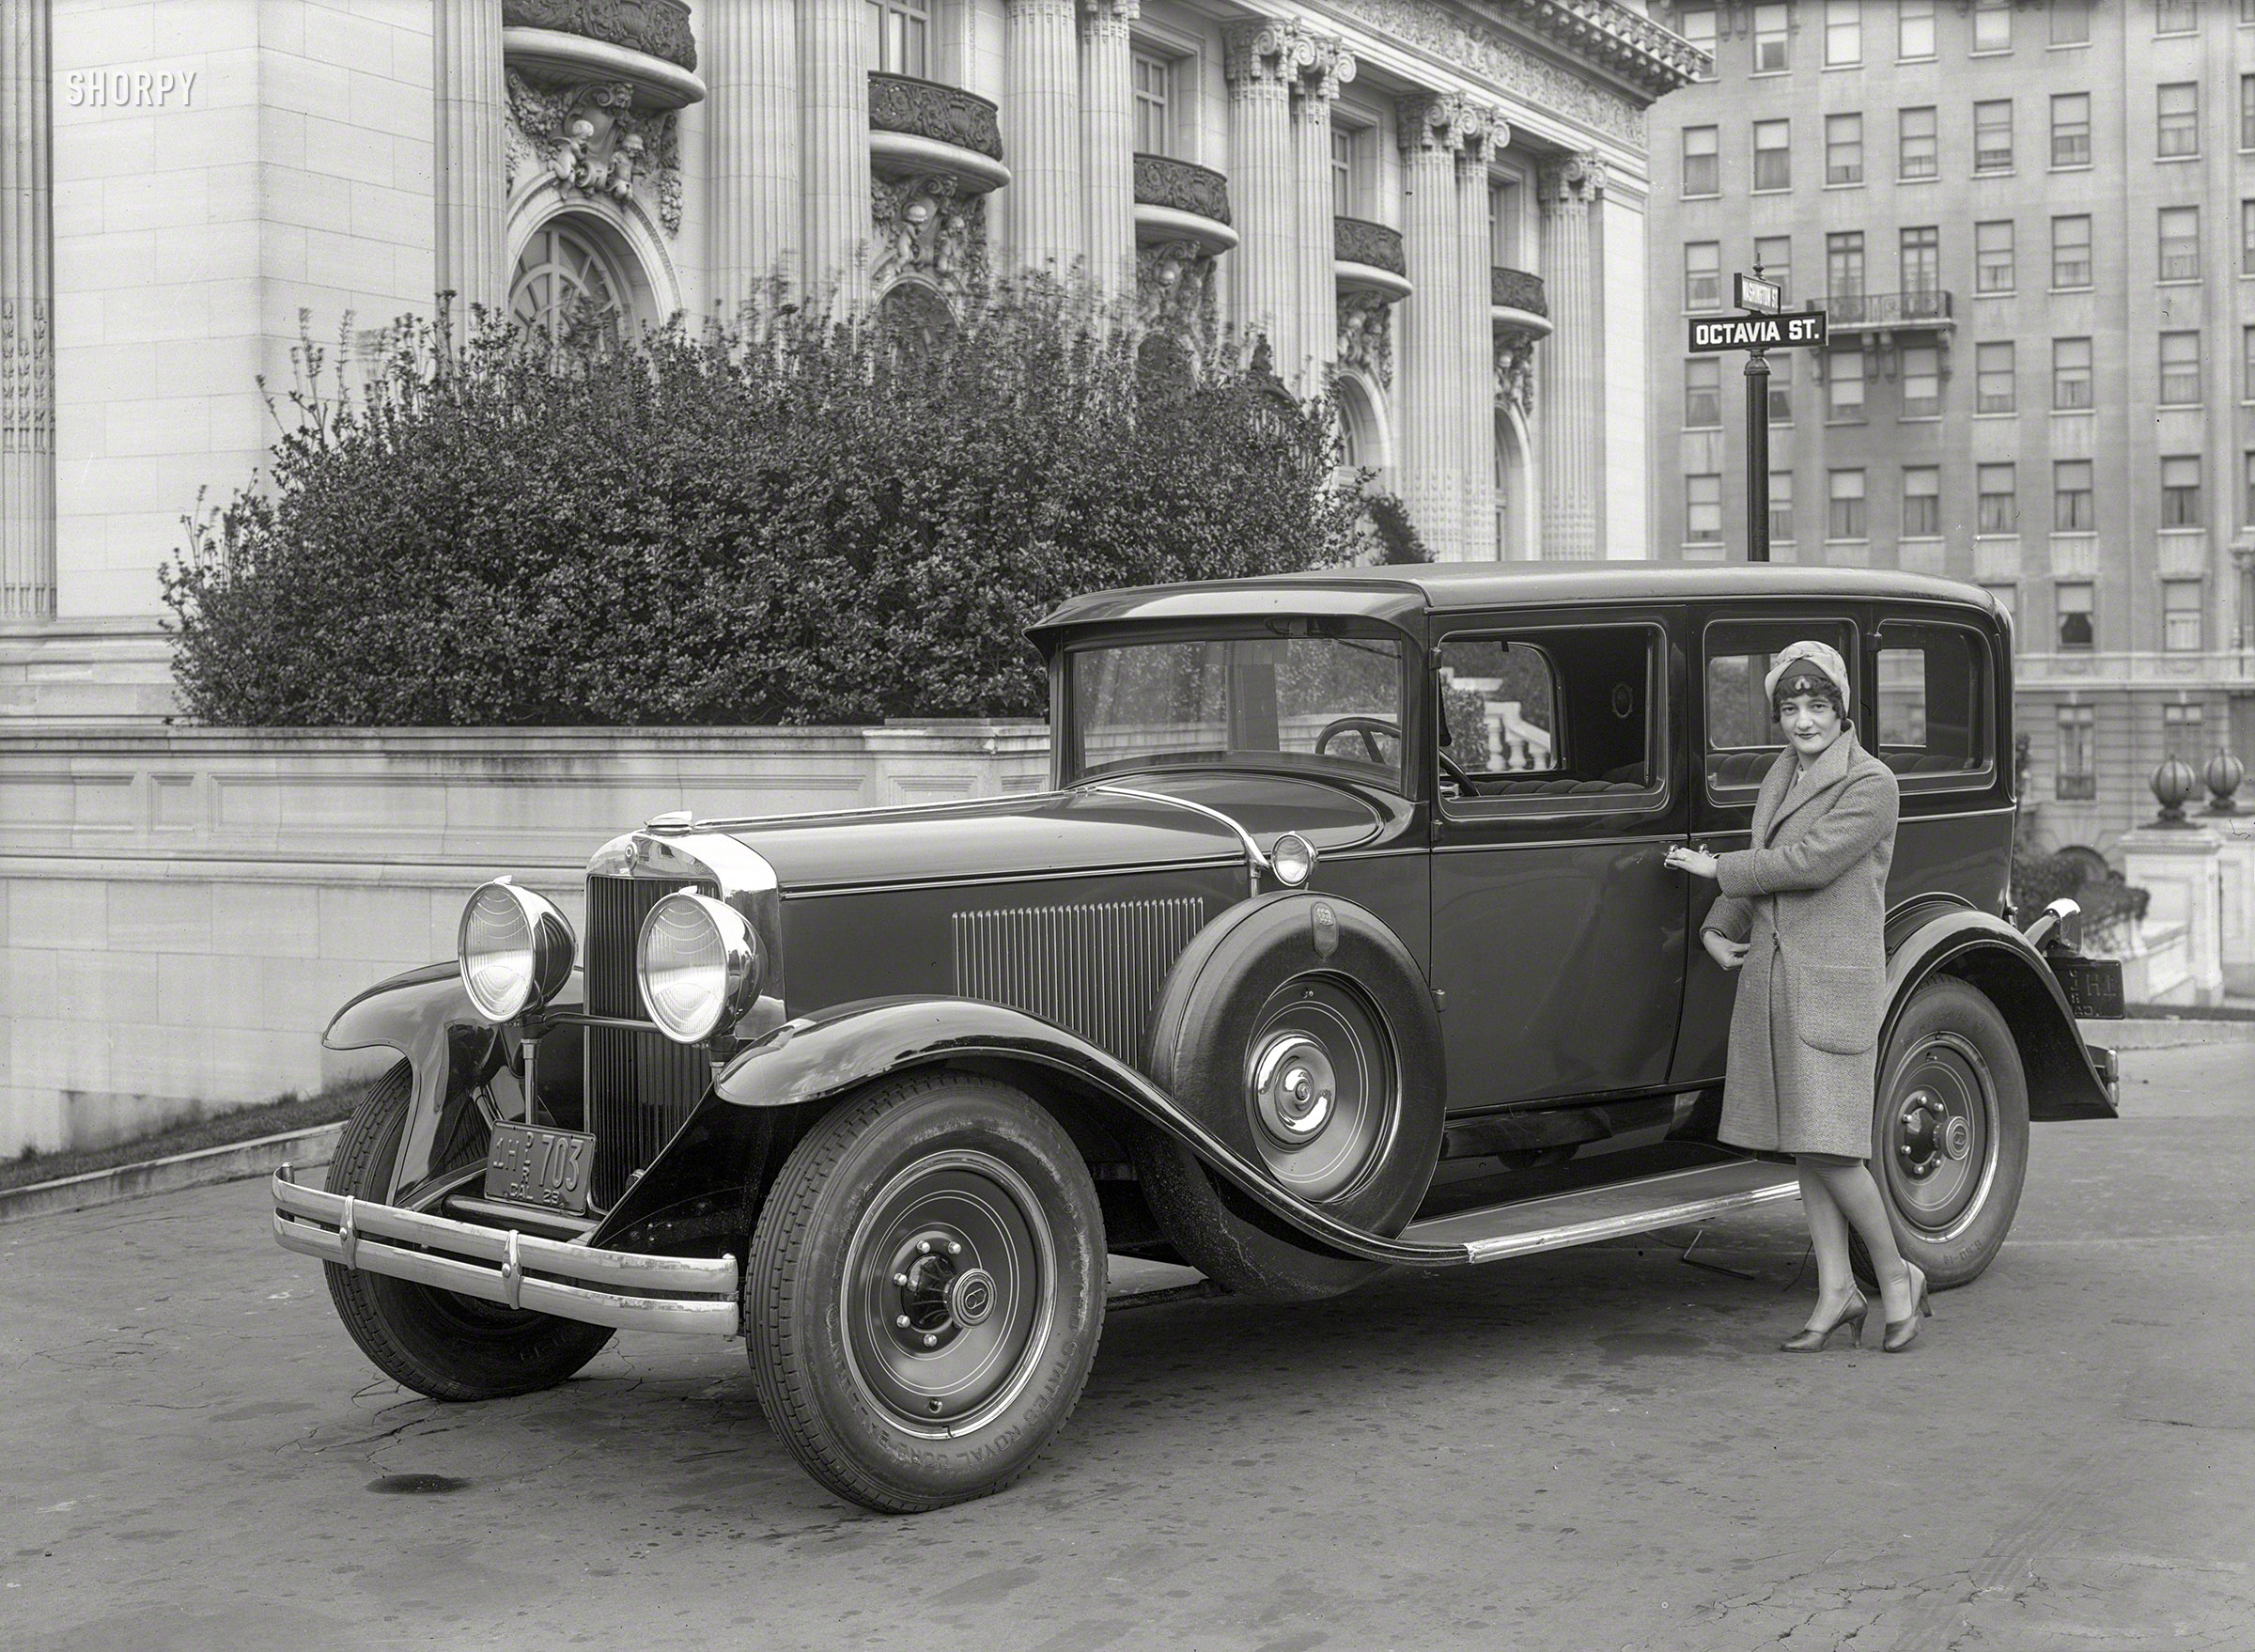 San Francisco, 1929. "Graham-Paige sedan at Spreckels Mansion, Octavia and Washington Streets." 5x7 glass negative by Christopher Helin. View full size.